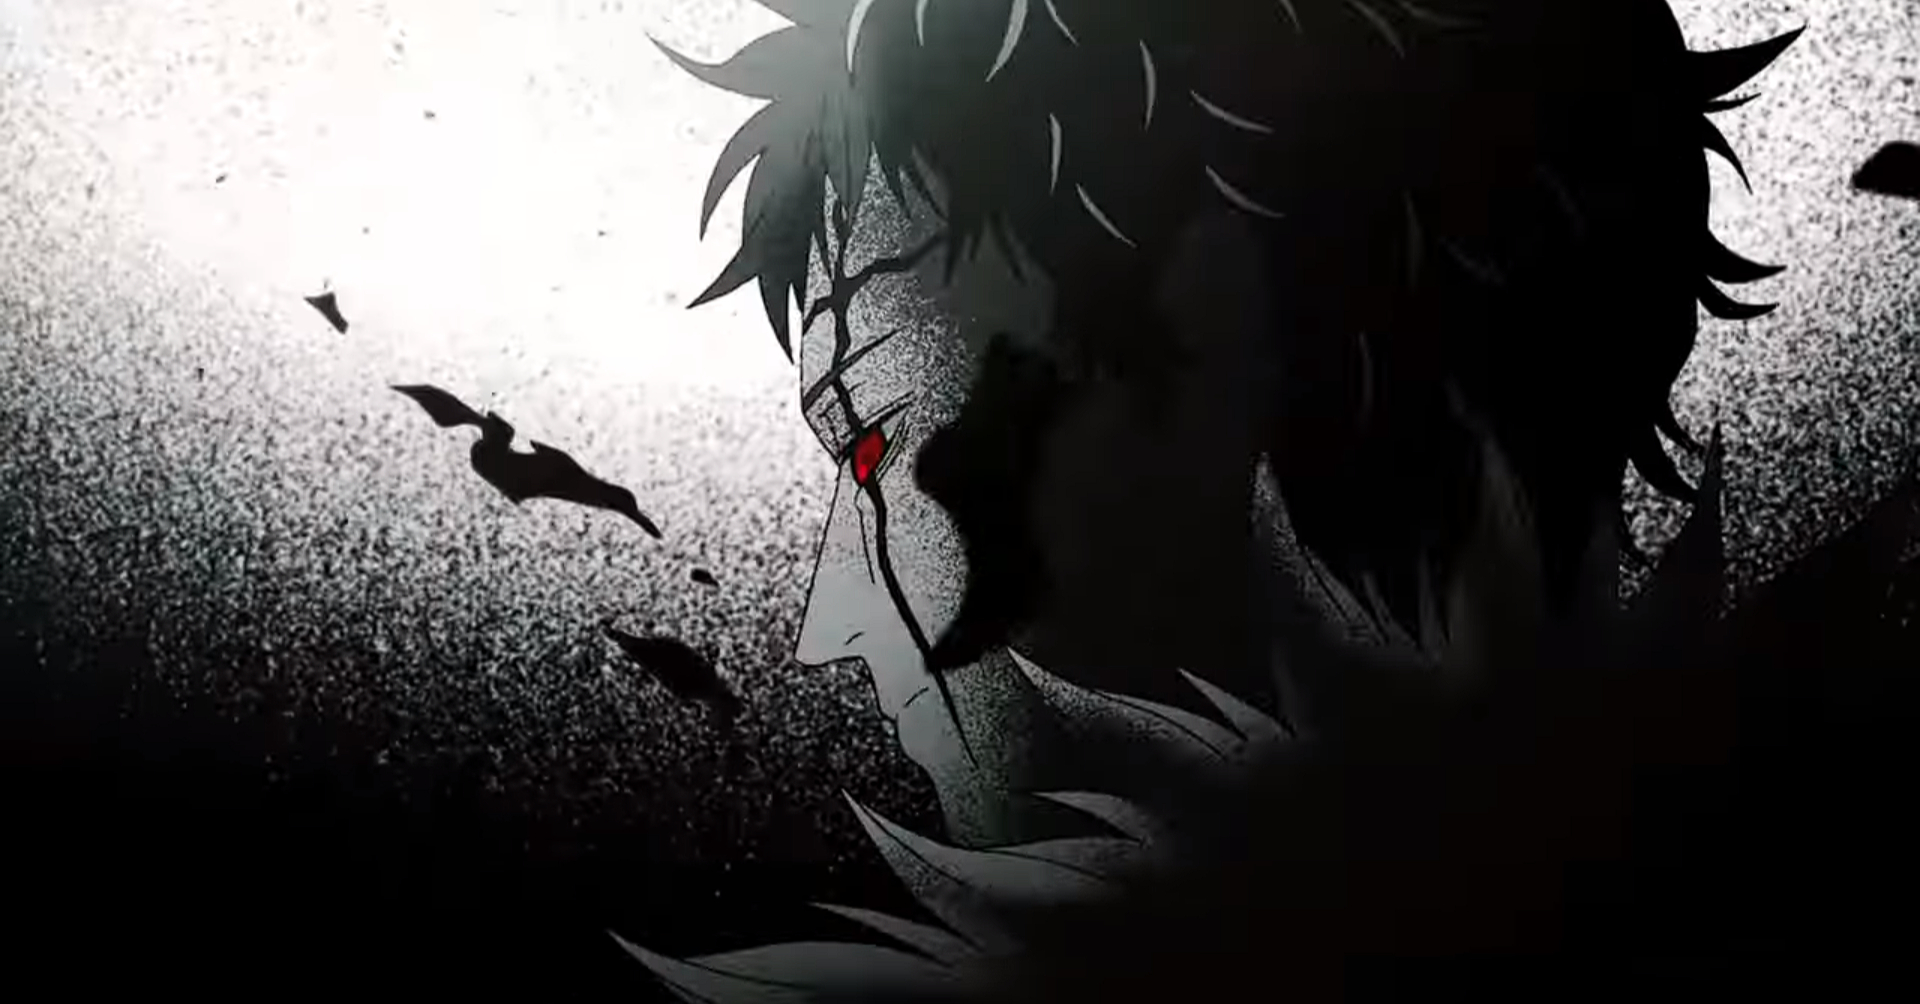 Black Clover Reveals 13th Opening Theme By Snow Man - Anime Corner